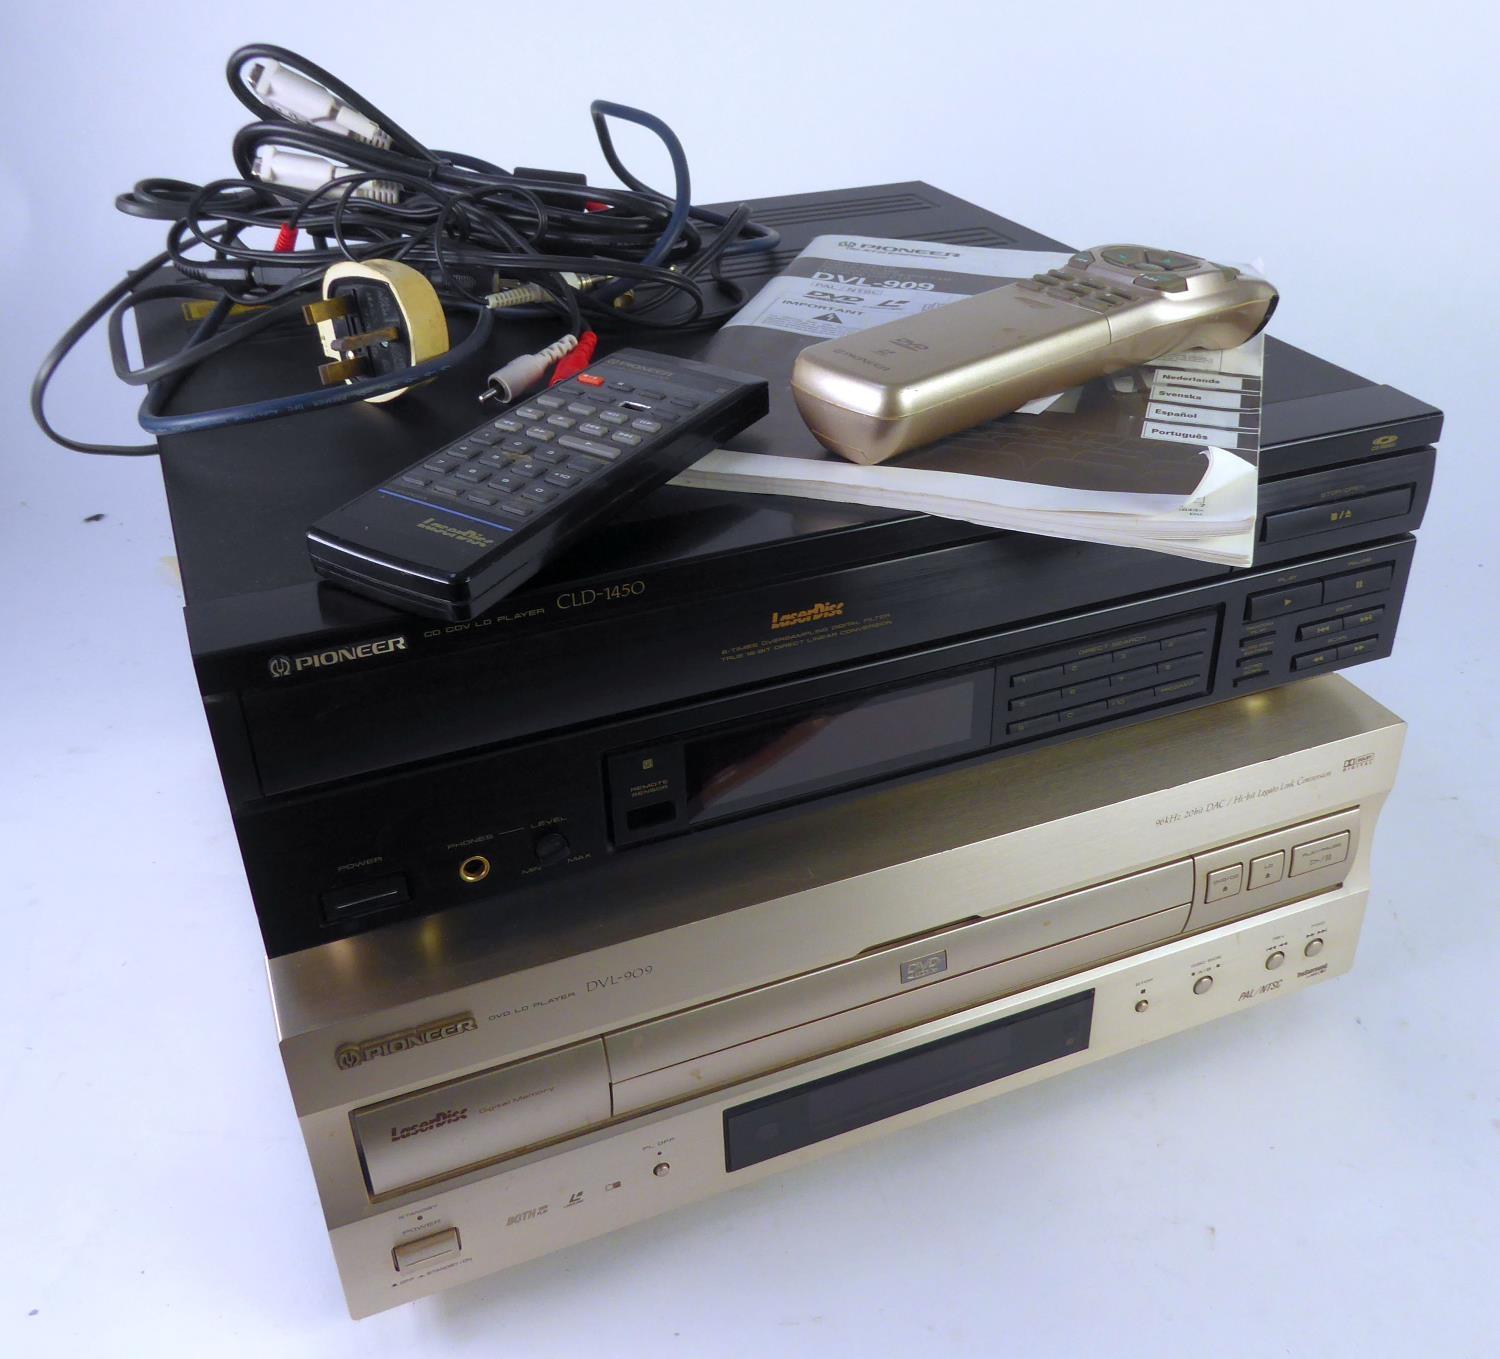 PIONEER LASER DISC PLAYER, model CLD-1450, plus remote control, TOGETHER WITH ANOTHER PIONEER